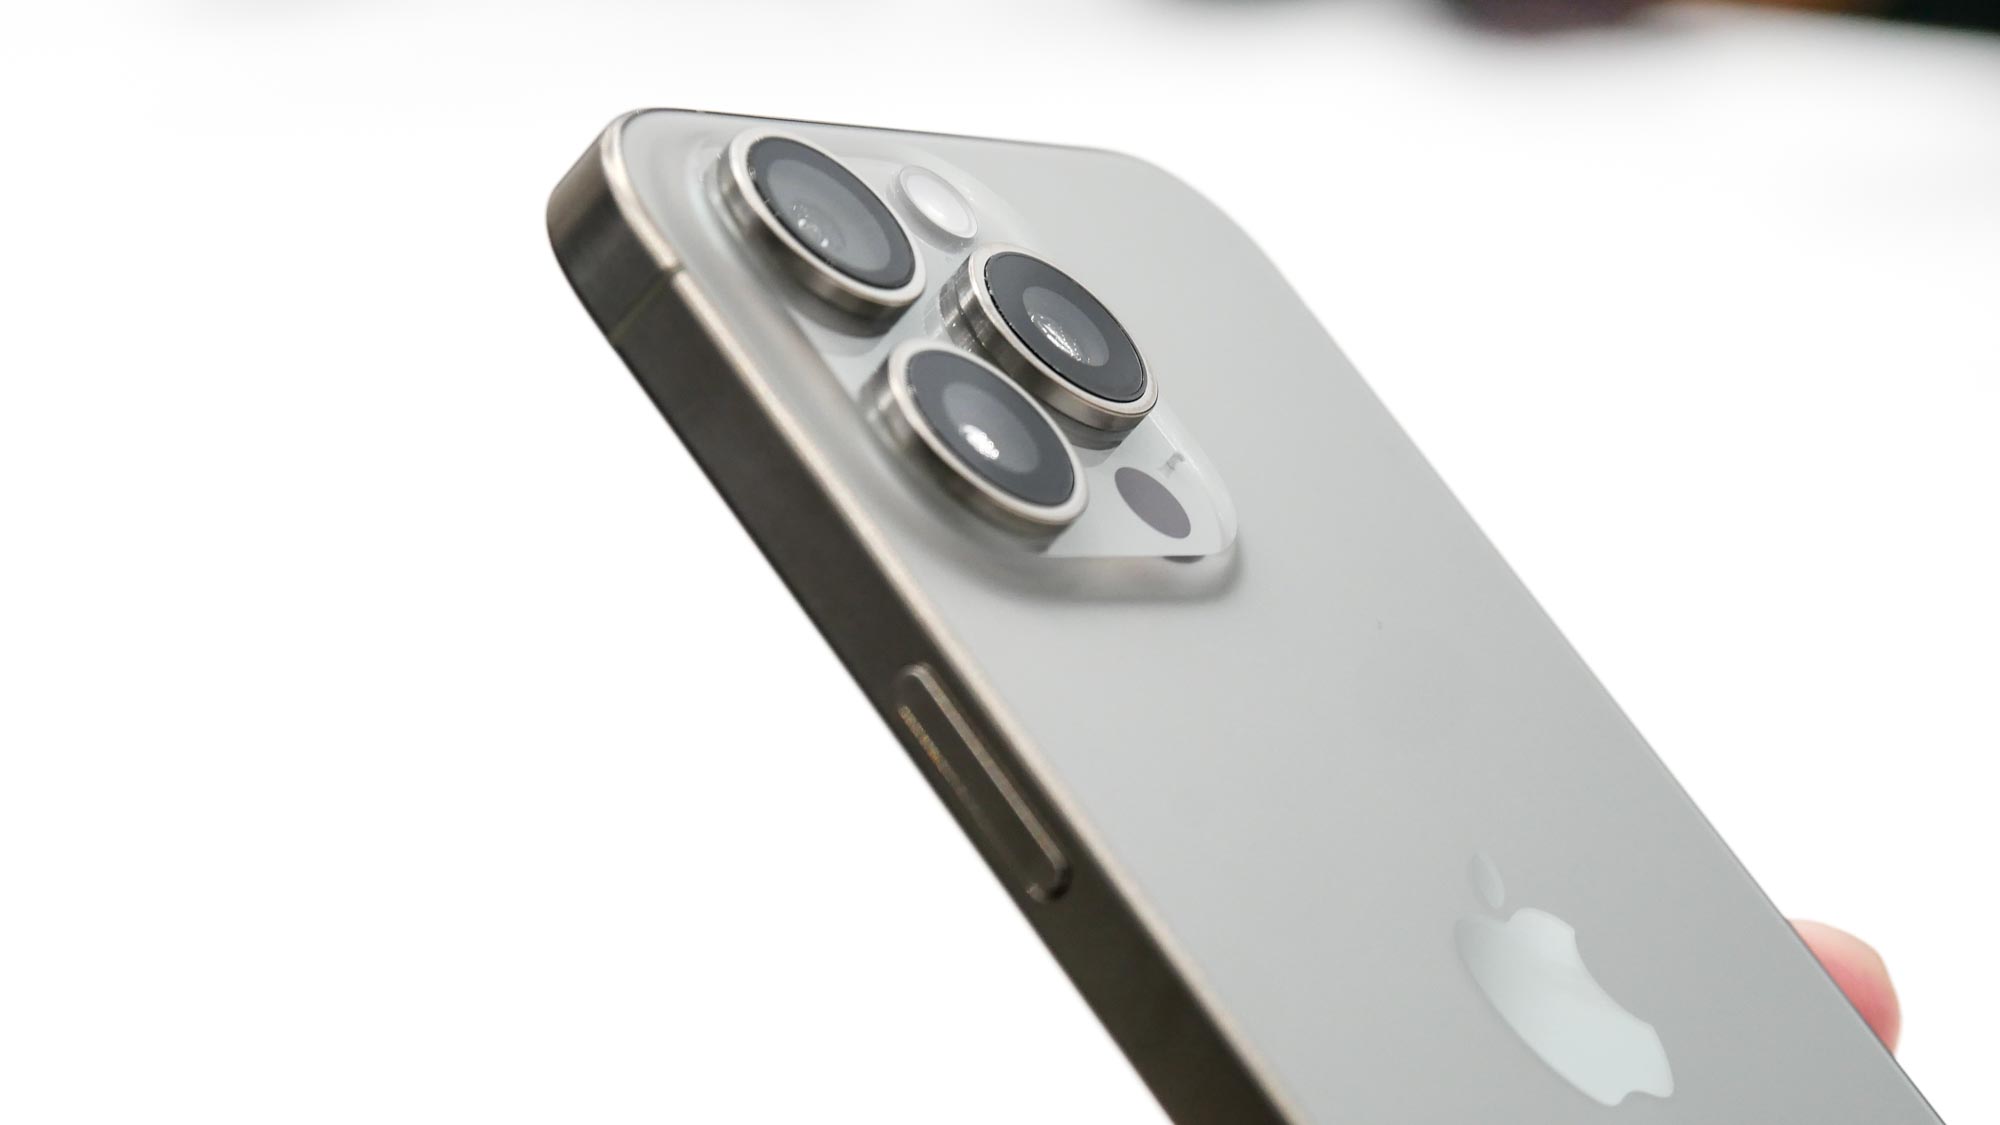 New iPhone 15 Pro Can Play Console Versions Of Games - Insider Gaming